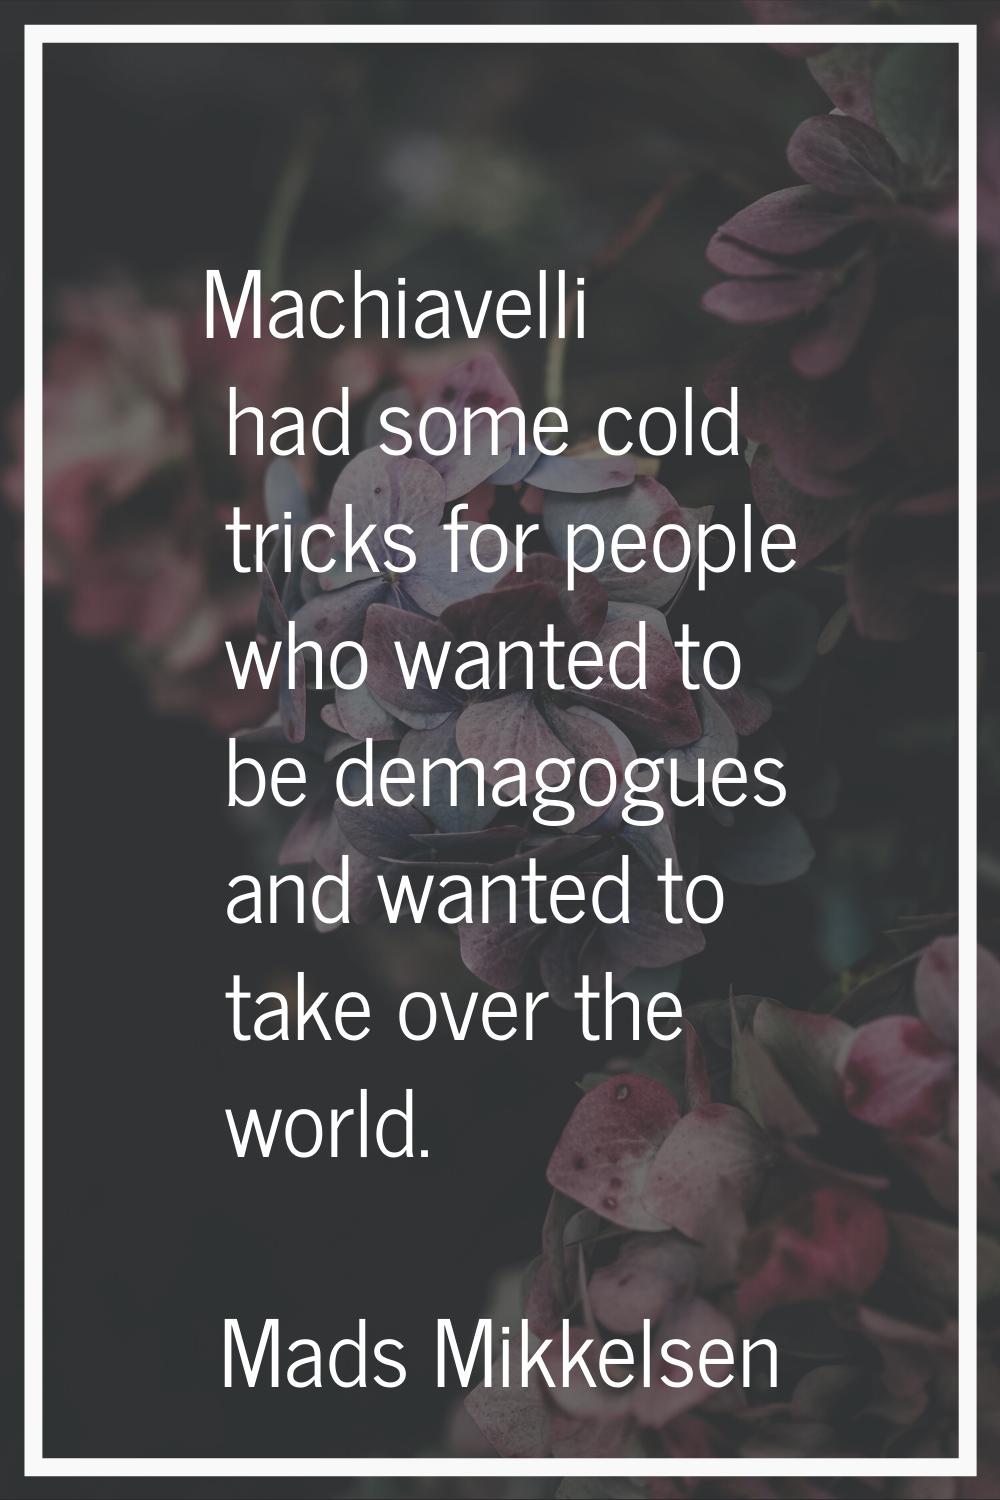 Machiavelli had some cold tricks for people who wanted to be demagogues and wanted to take over the